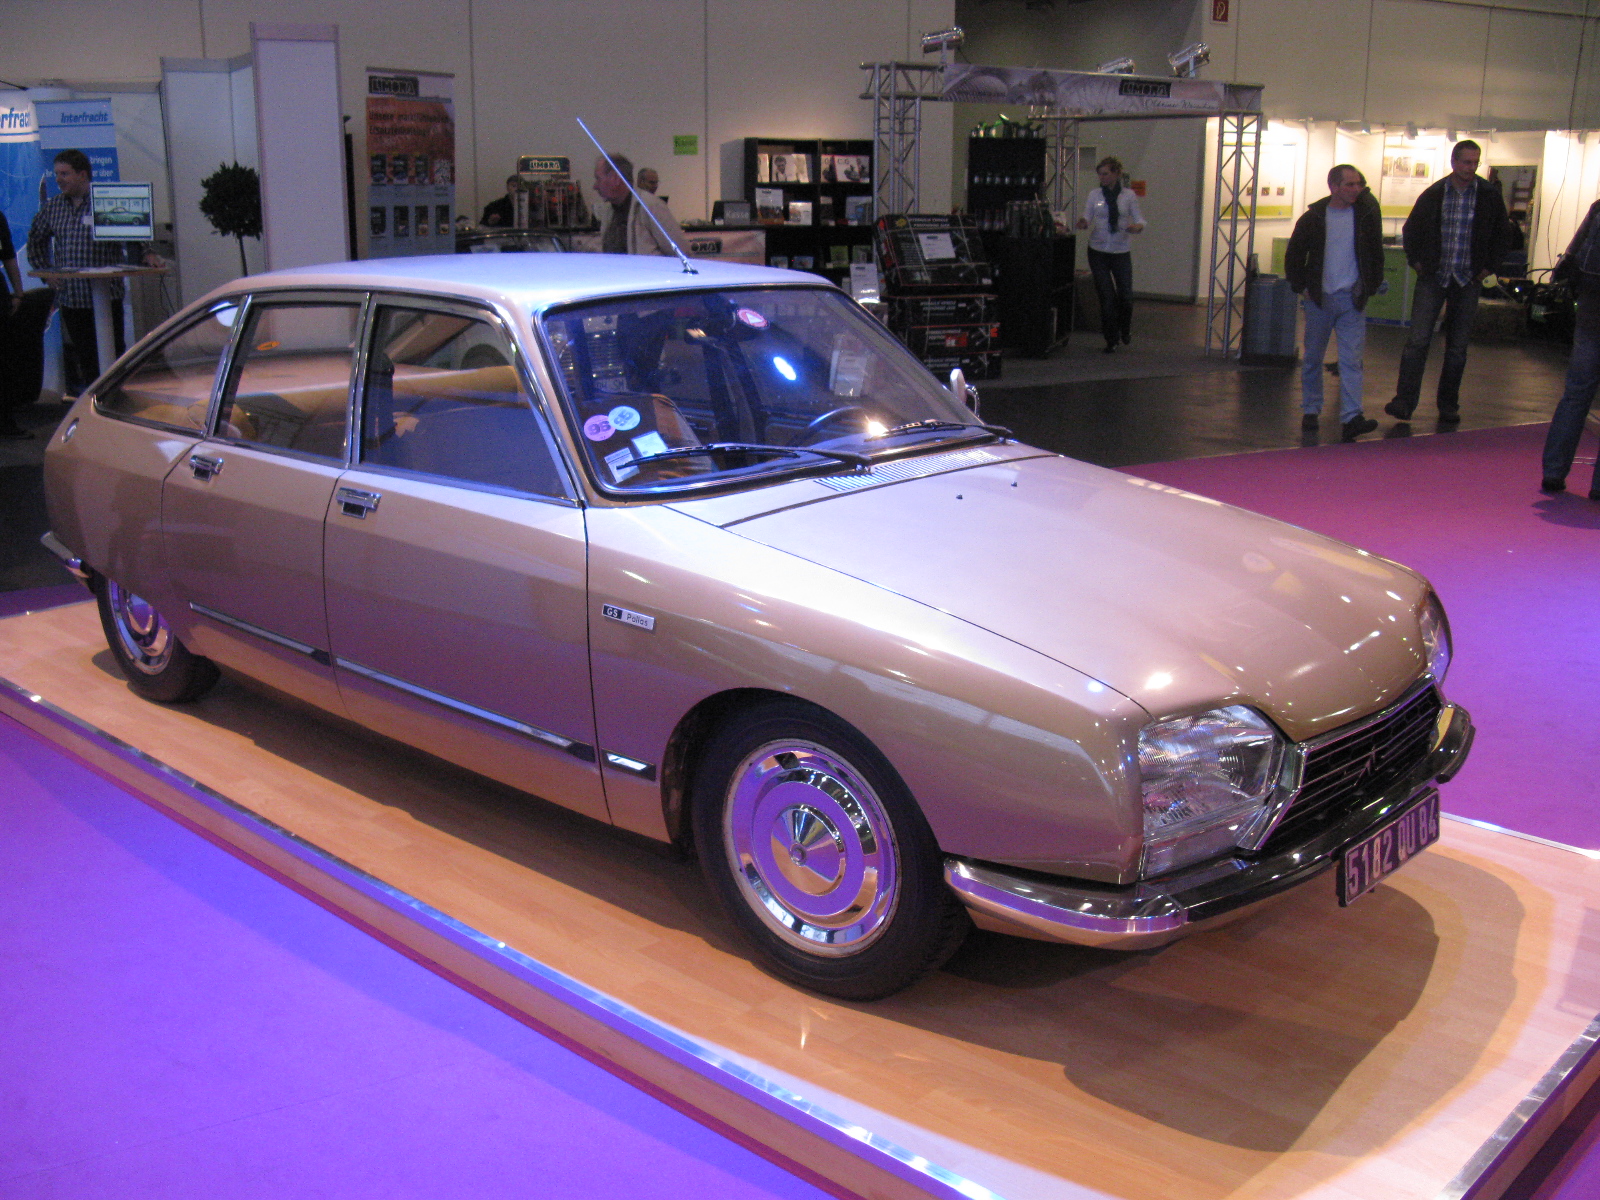 an old, silver car is sitting on display at an exhibition